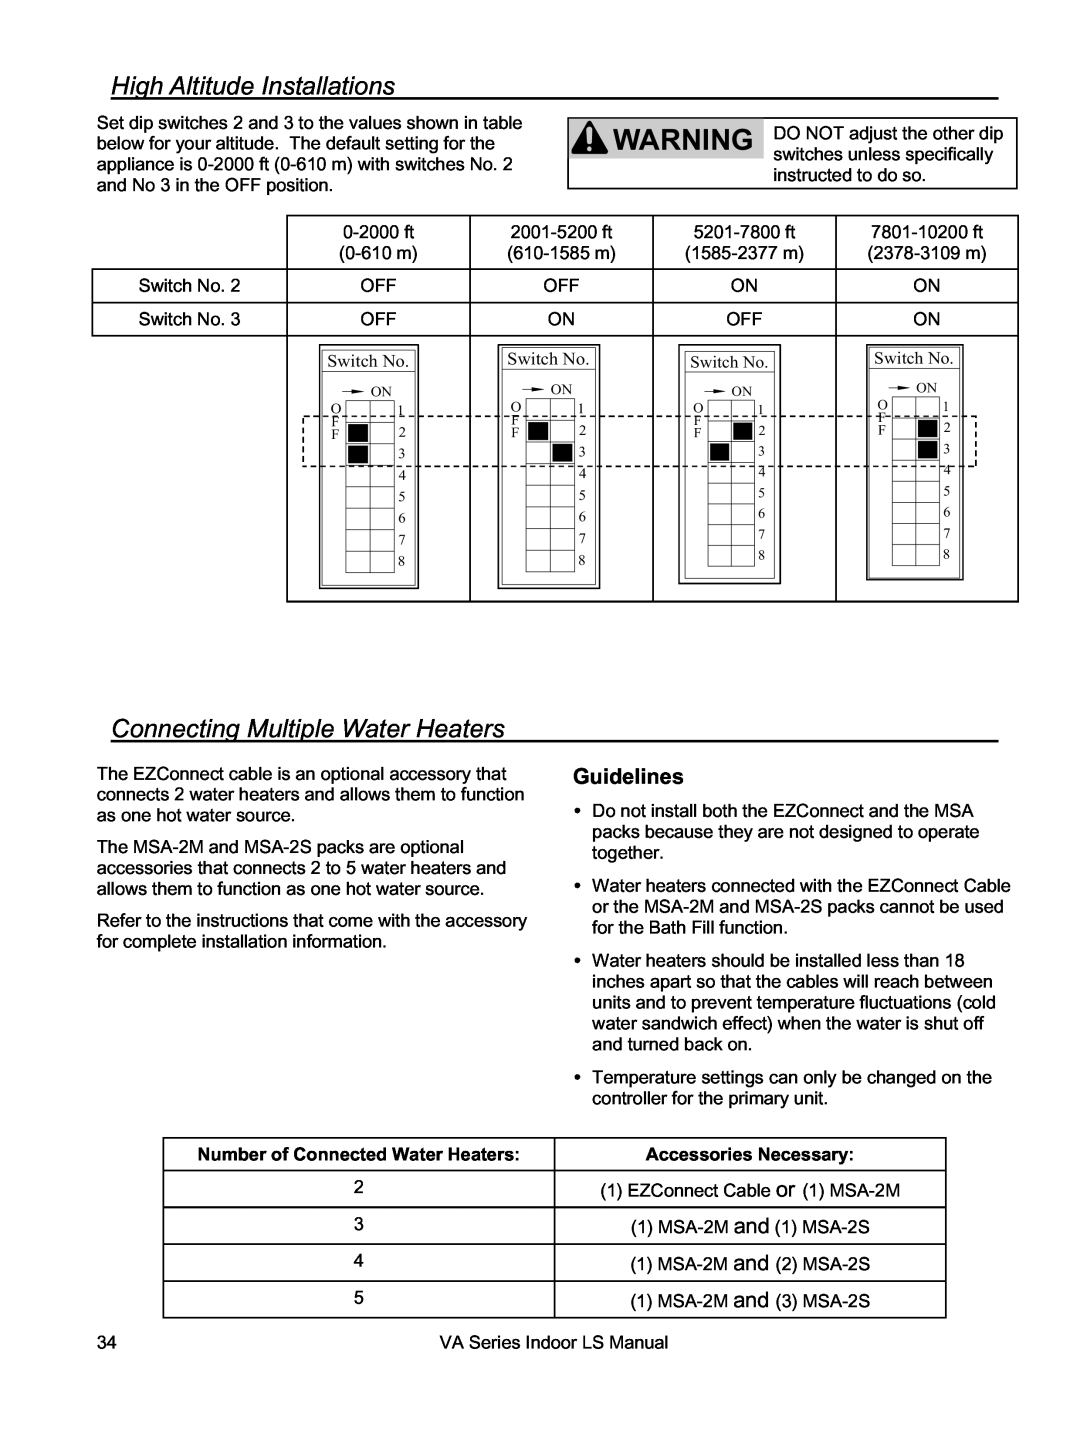 Rinnai REU-VA3237FFU installation manual High Altitude Installations, Connecting Multiple Water Heaters, Guidelines 